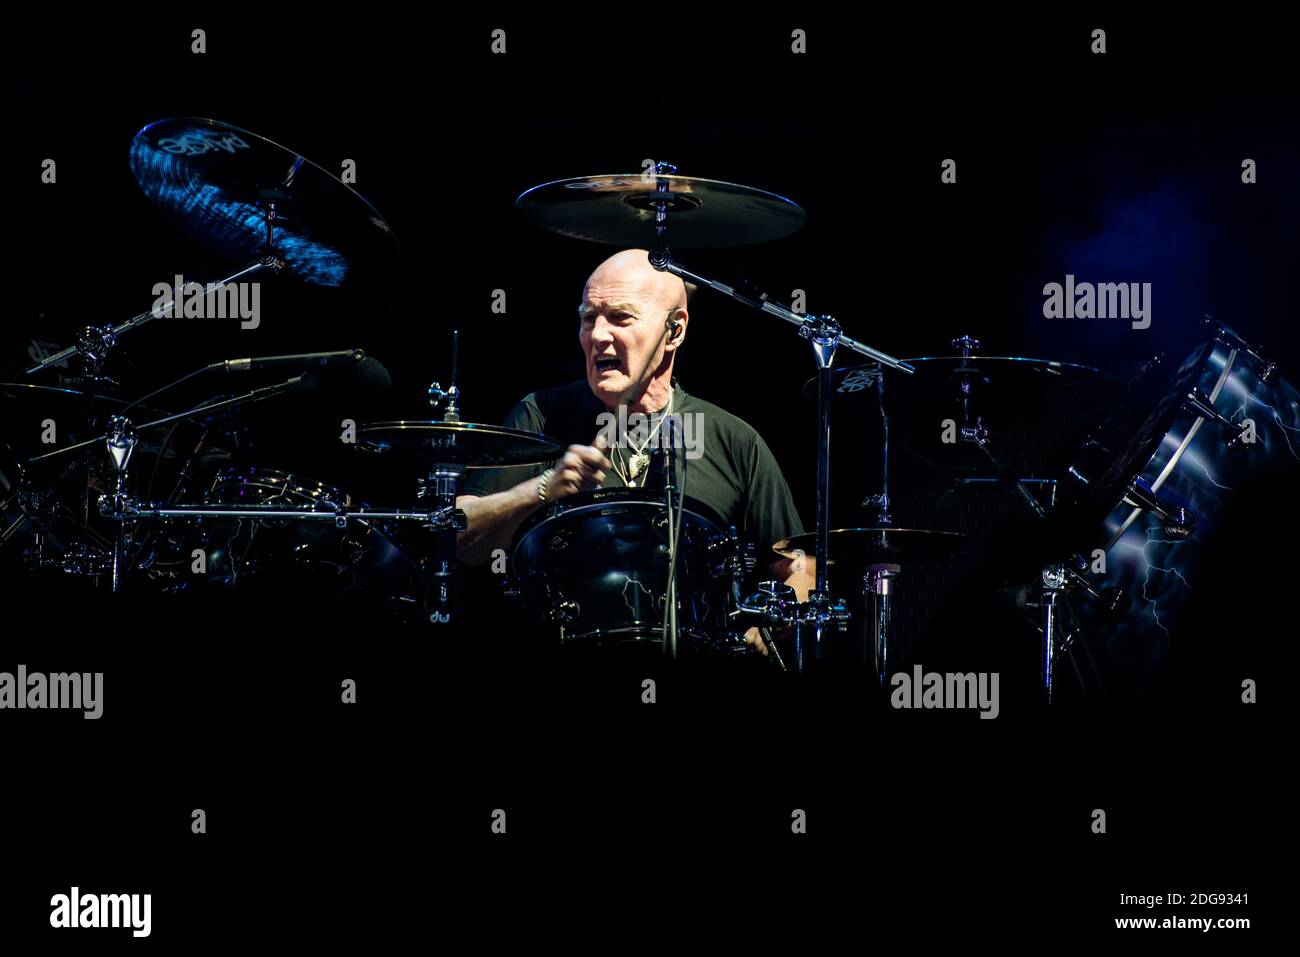 Chris Slade, of the Australian rock band AC/DC, performing live for the “Rock or Bust World Tour” at the Autodromo Enzo e Dino Ferrari of Imola, Italy Stock Photo